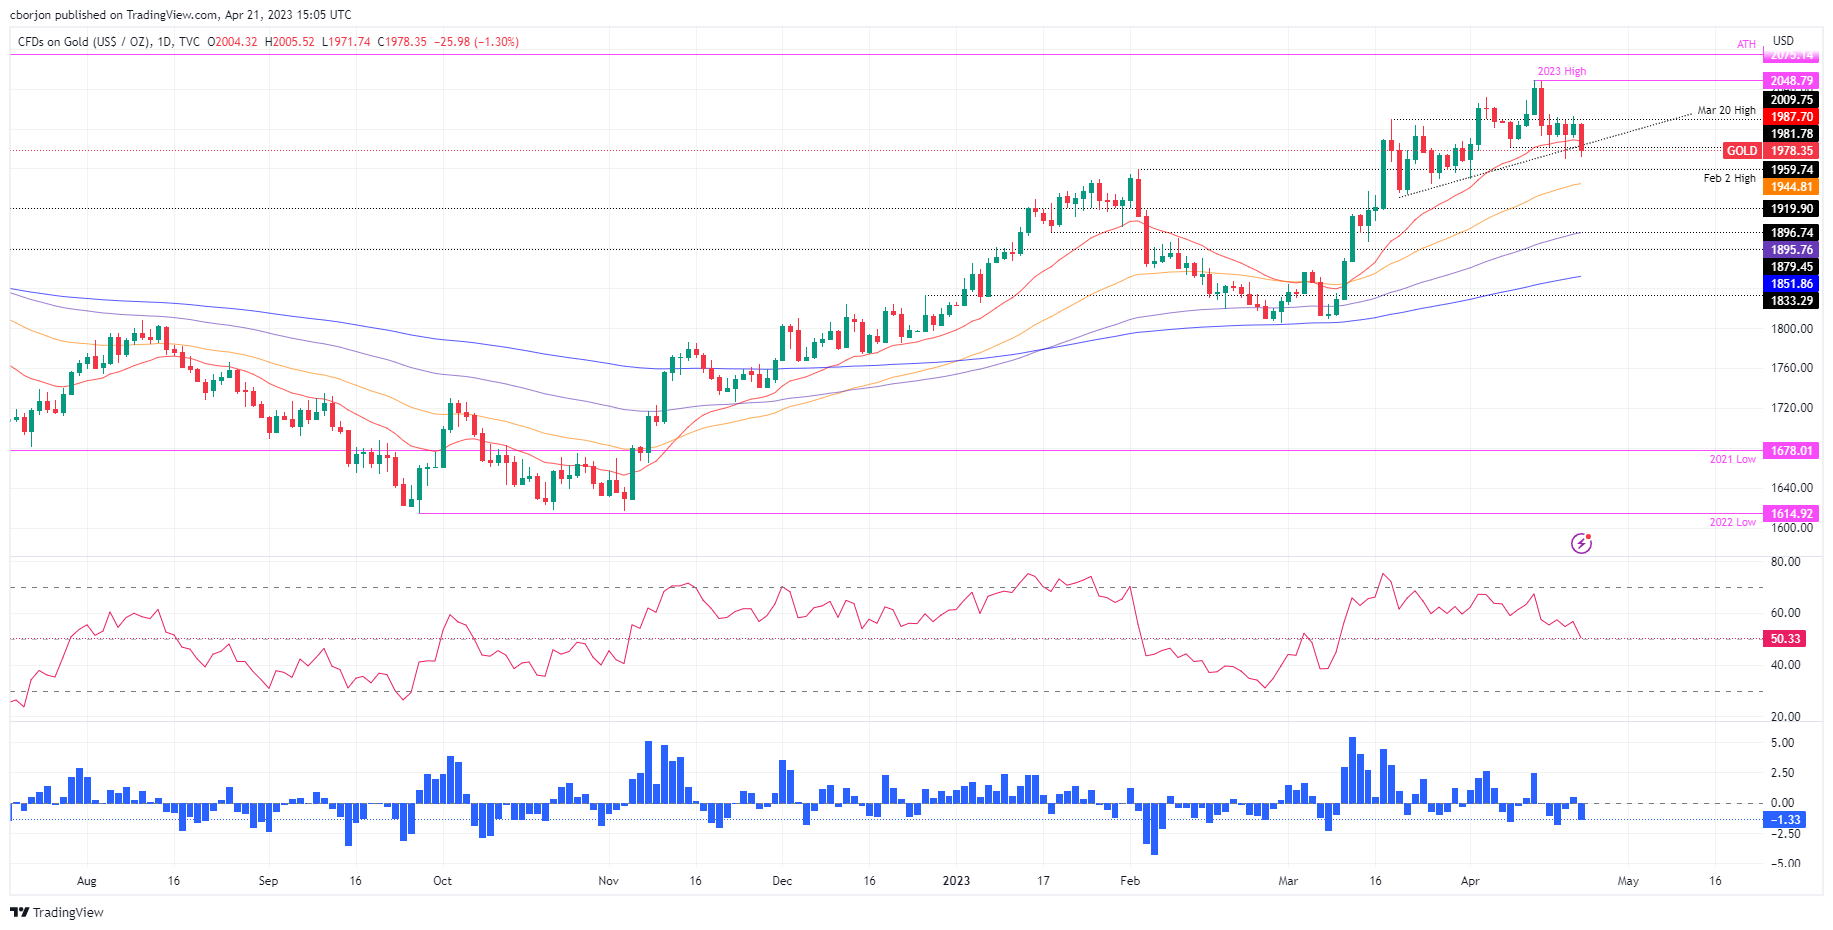 Gold Price Forecast: XAU/USD sinks below $2,000 as US PMIs improve and recession fears fade